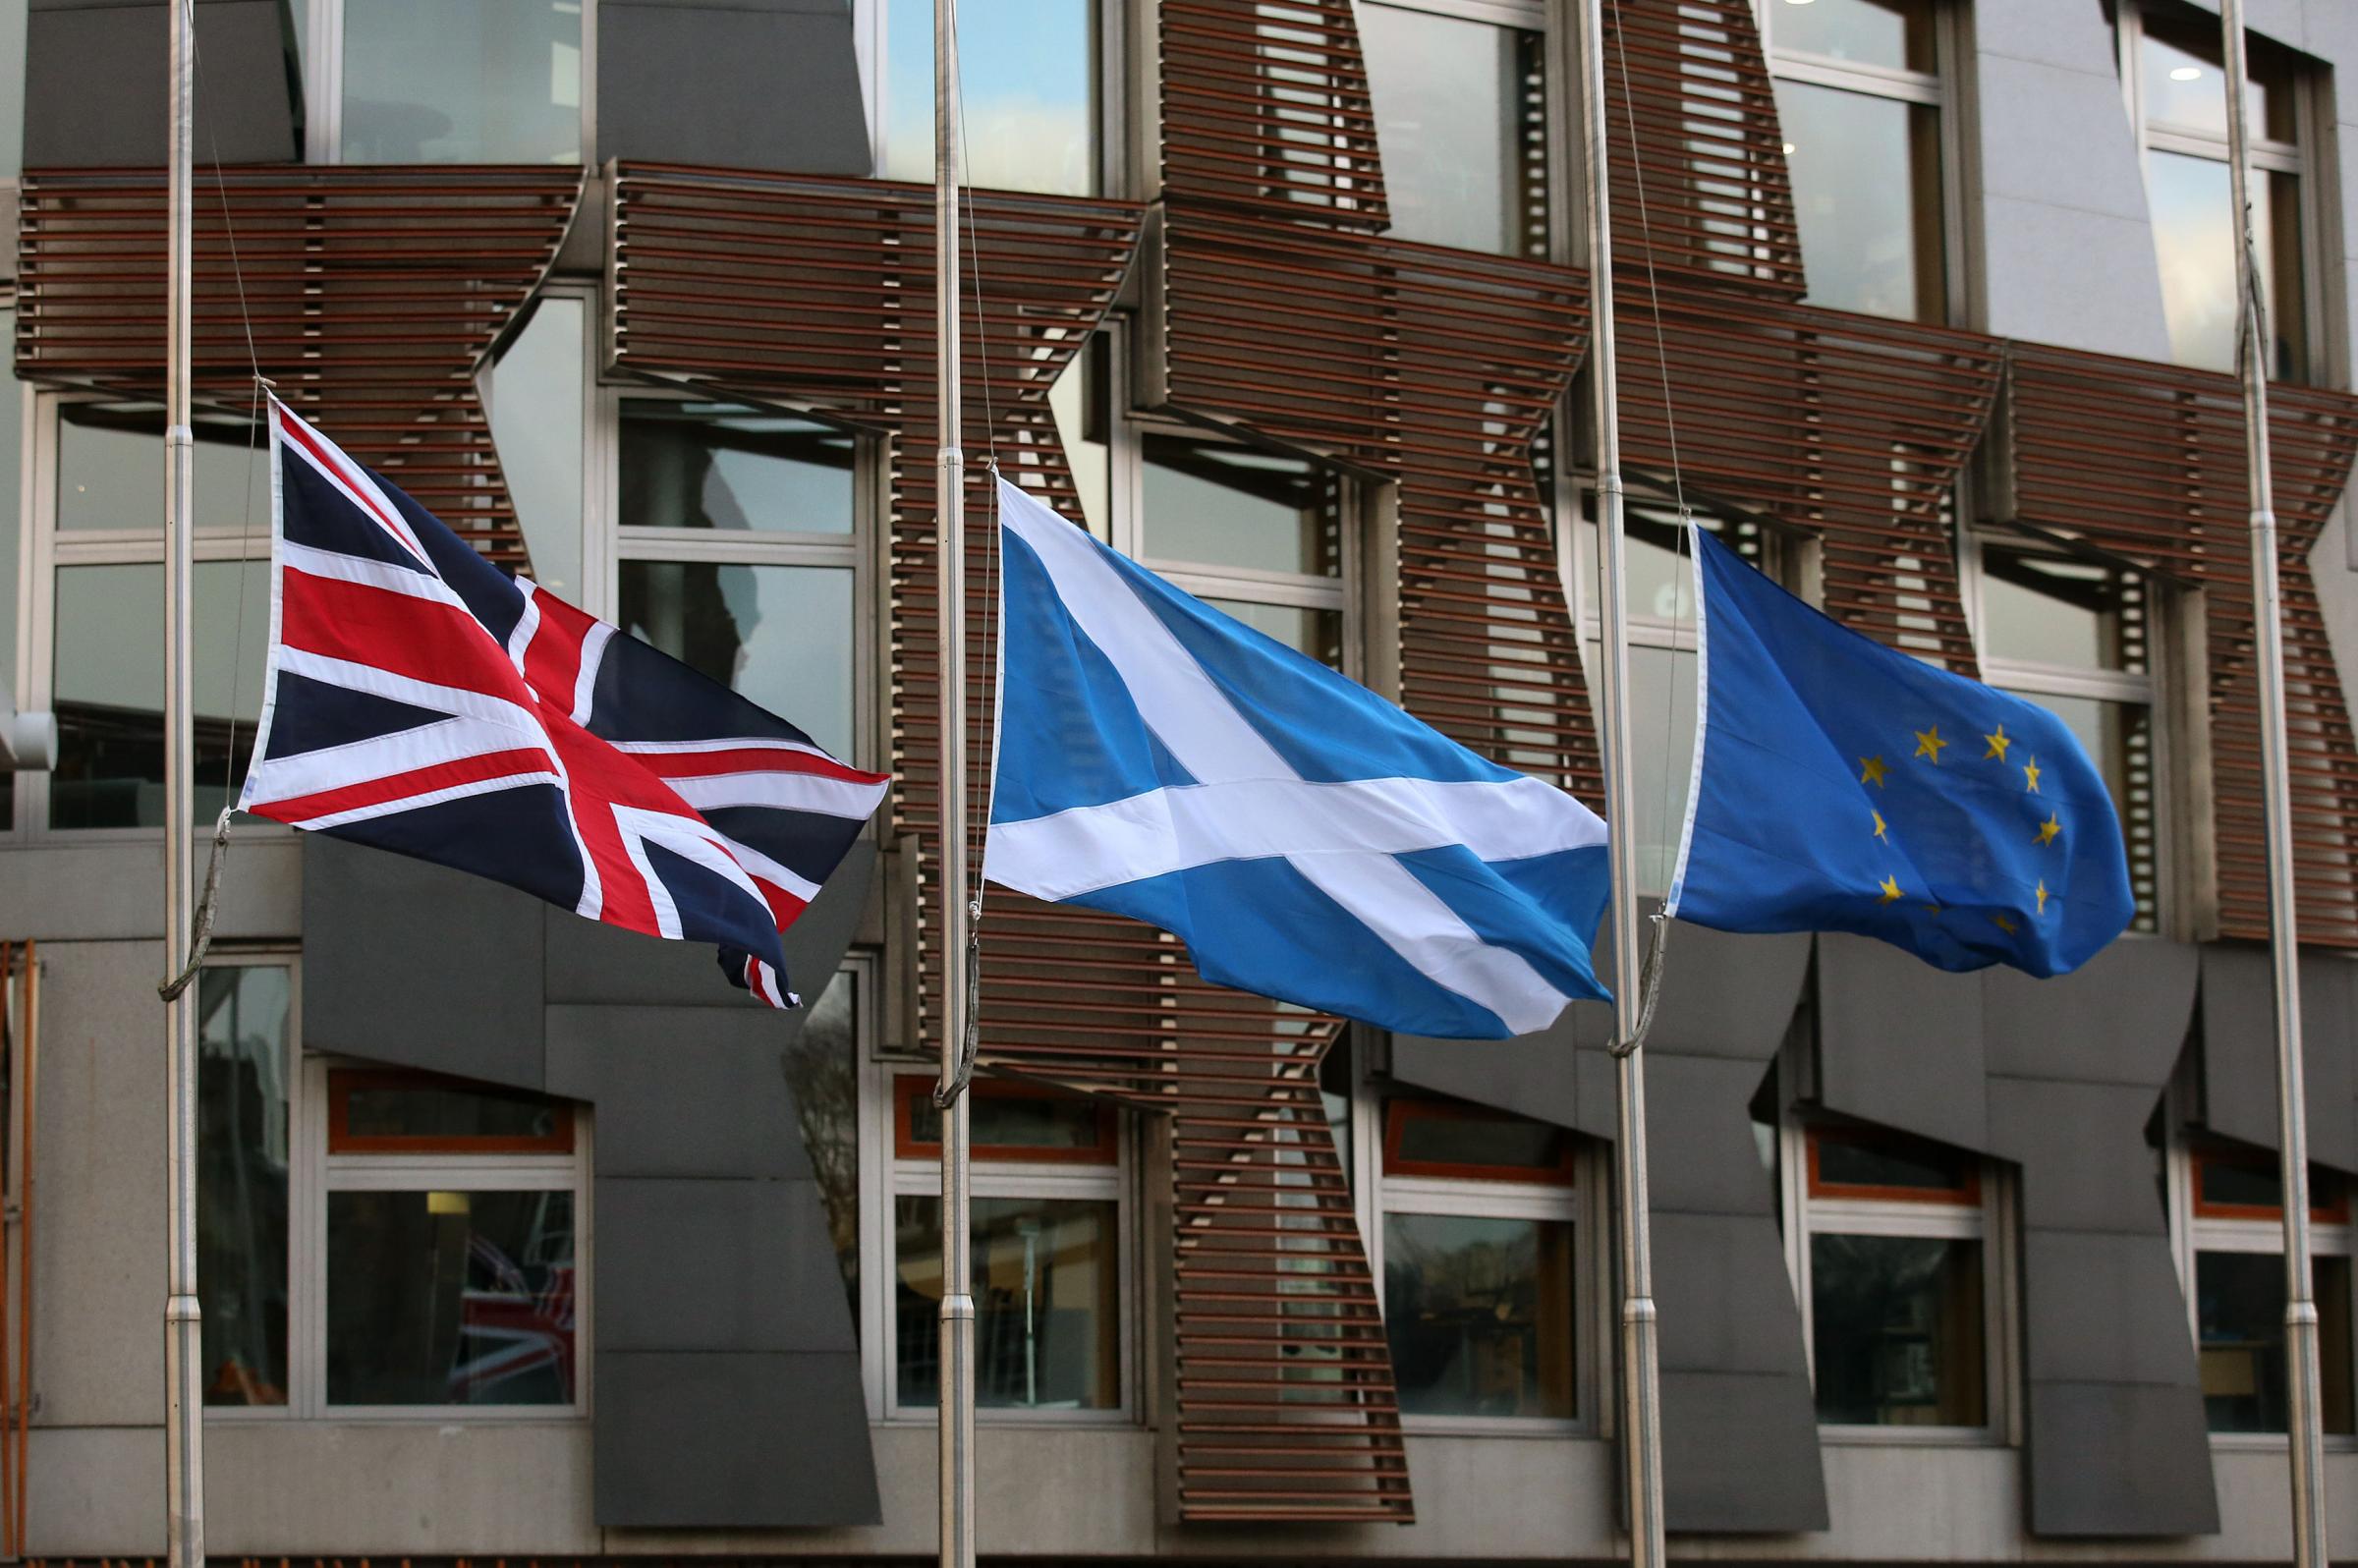 HAVE YOUR SAY: Would you like an EU referendum after Scottish independence?